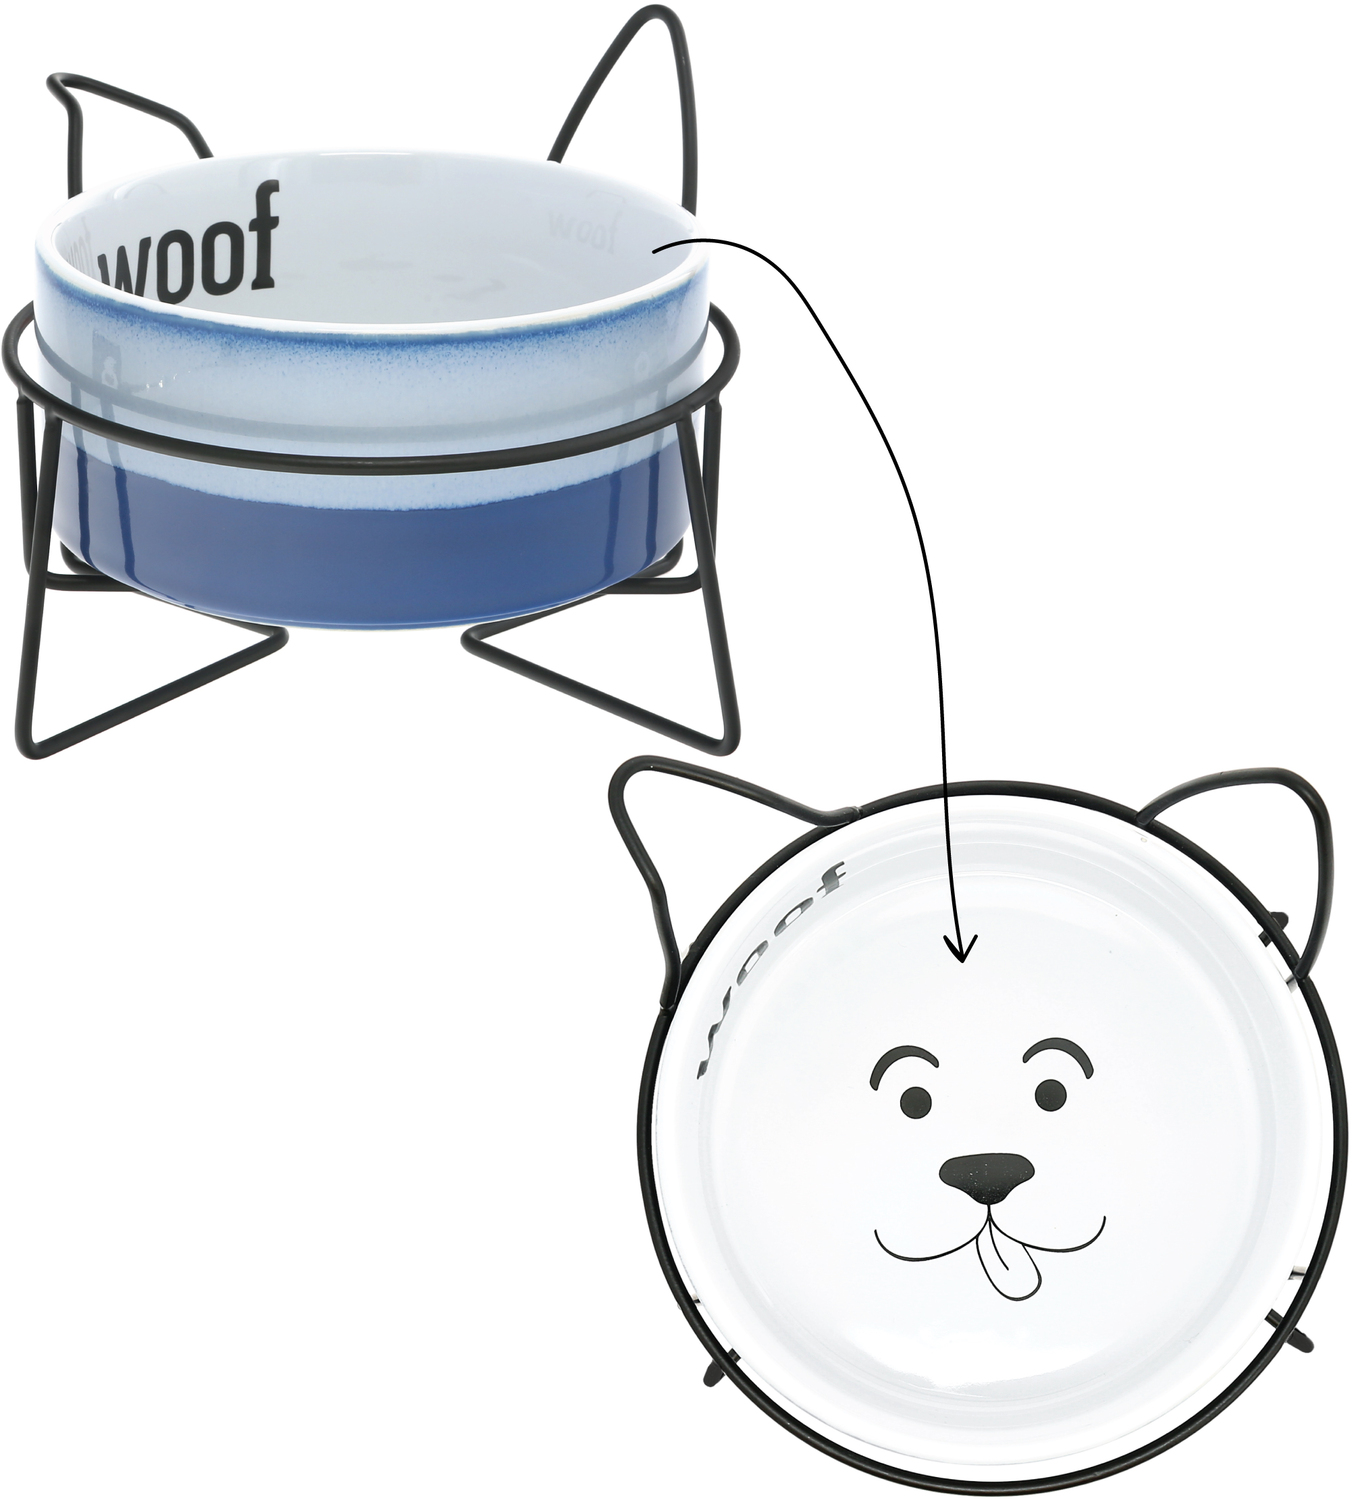 Woof by We Pets - Woof - 27 oz Ceramic Pet Bowl with Metal Stand